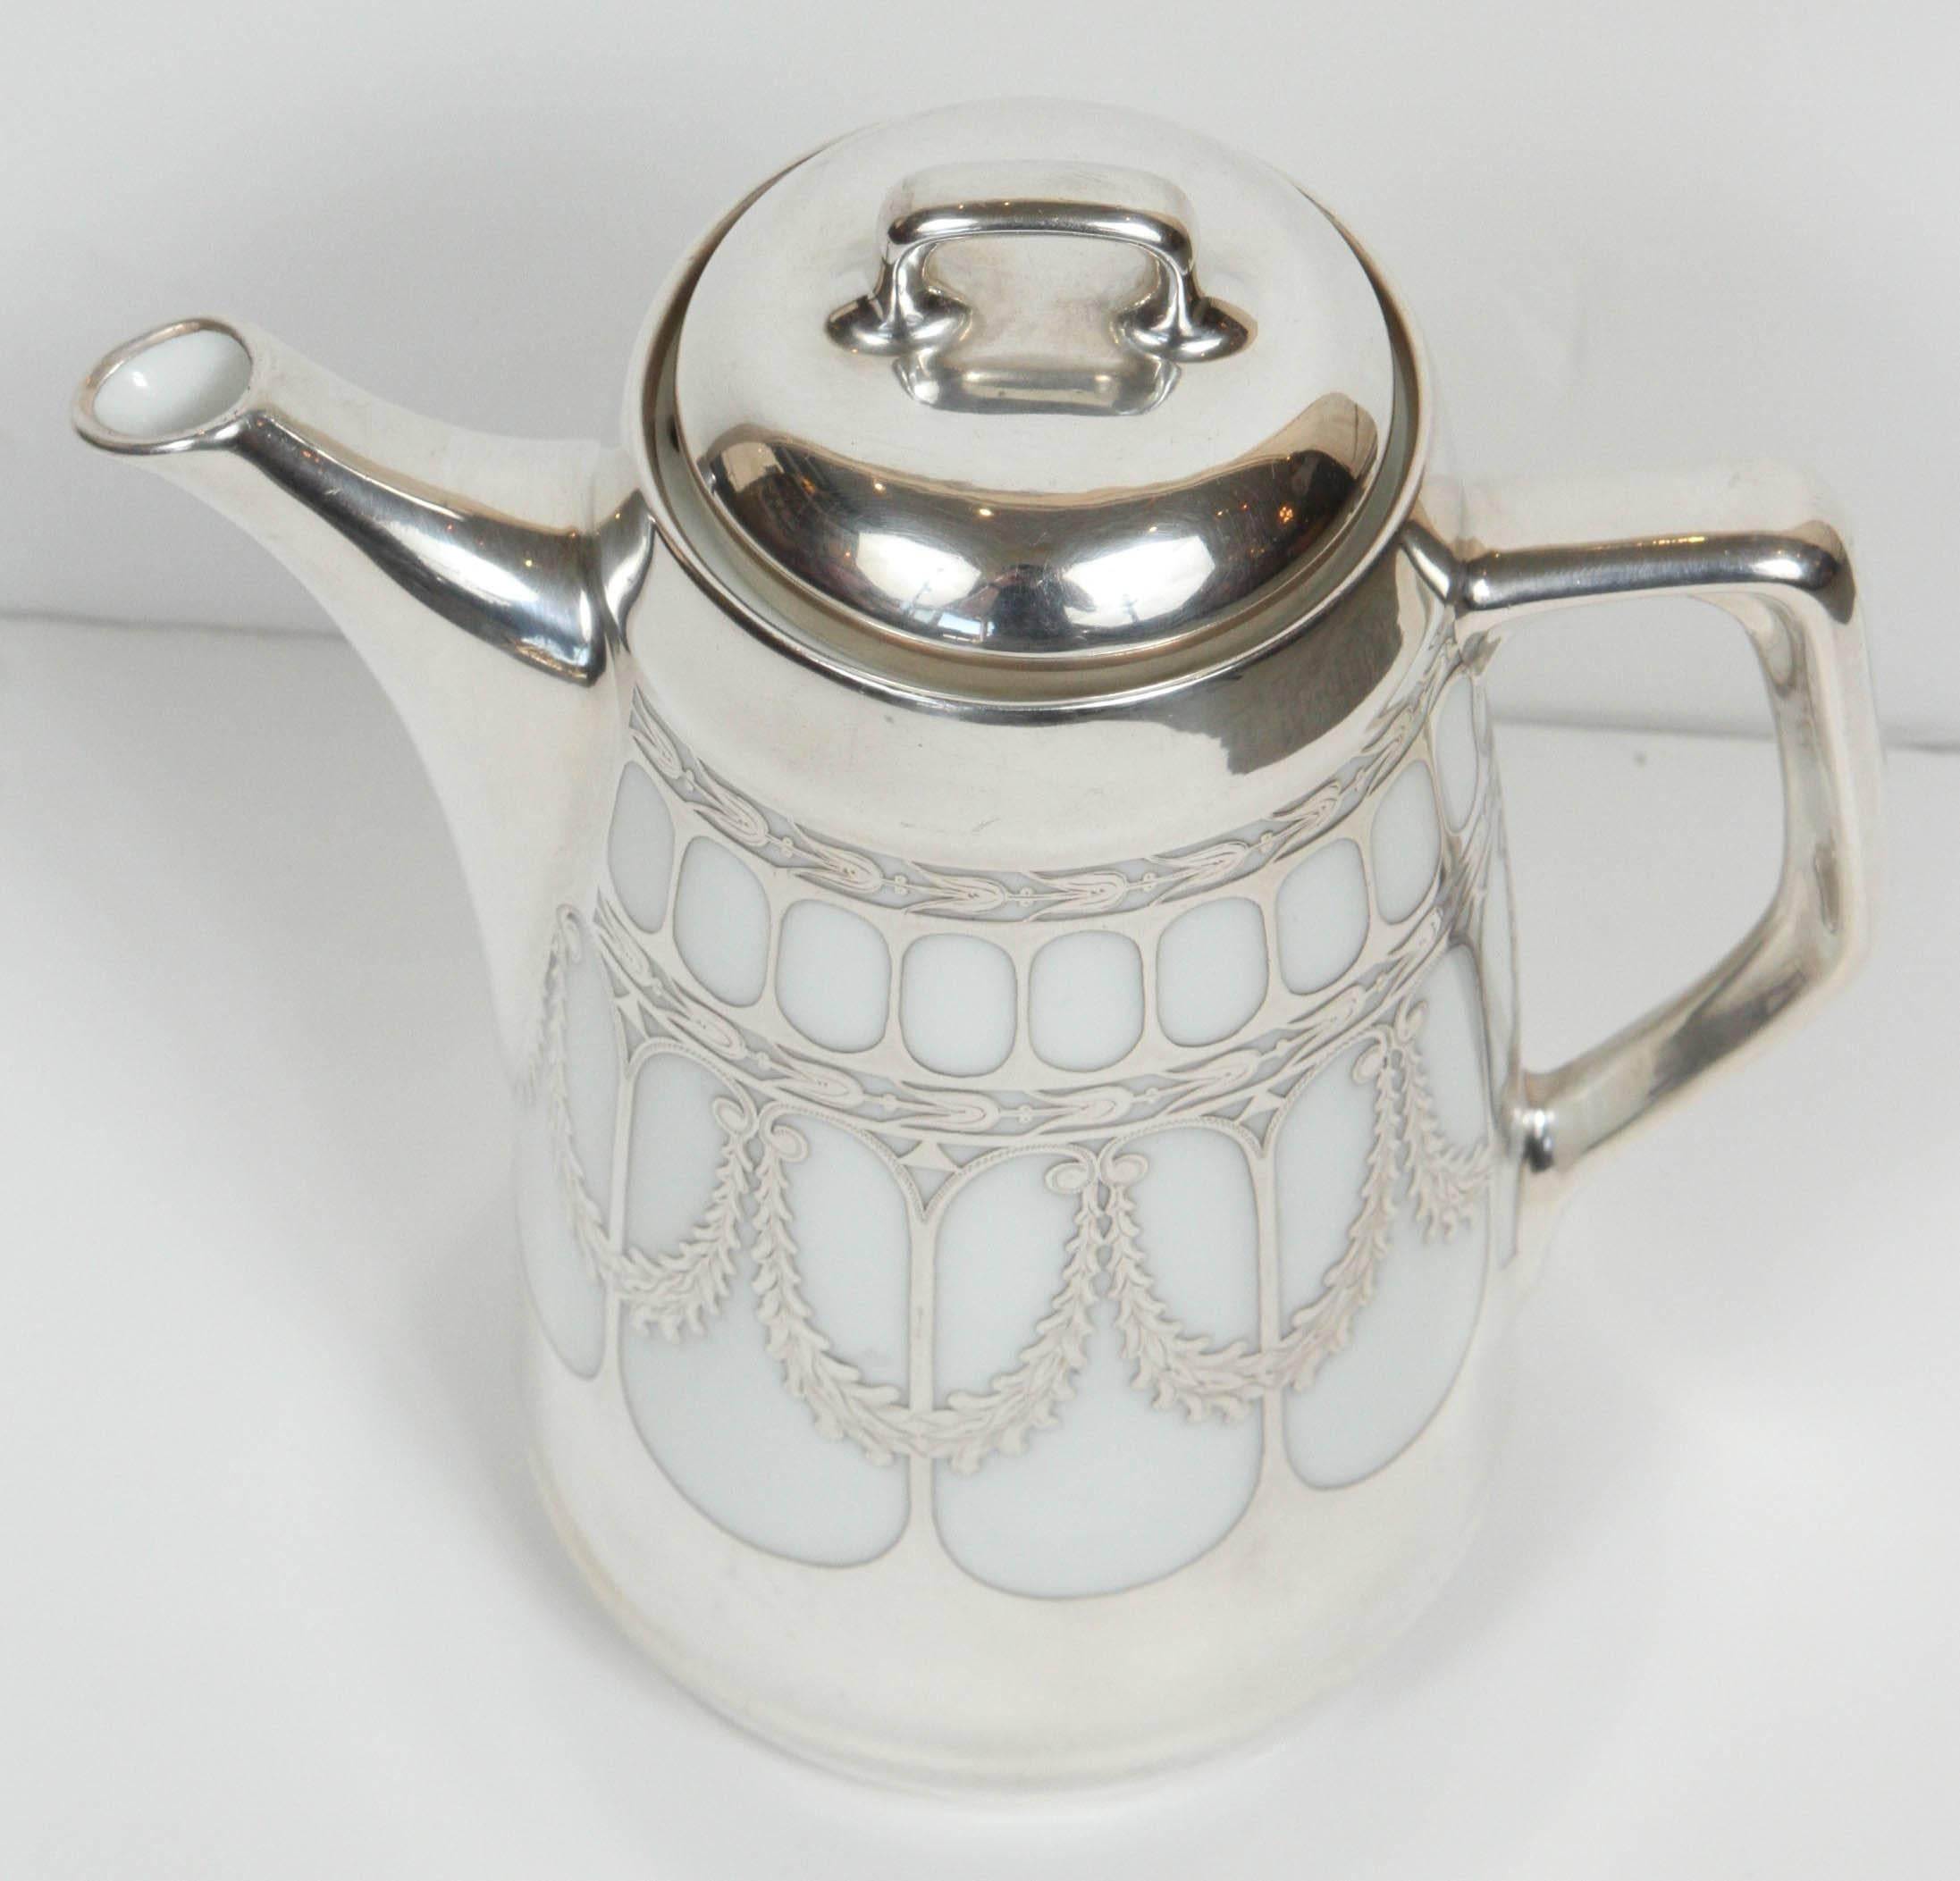 Vintage white porcelain with sterling silver overlay coffee pot from Germany, circa 1910-1920.